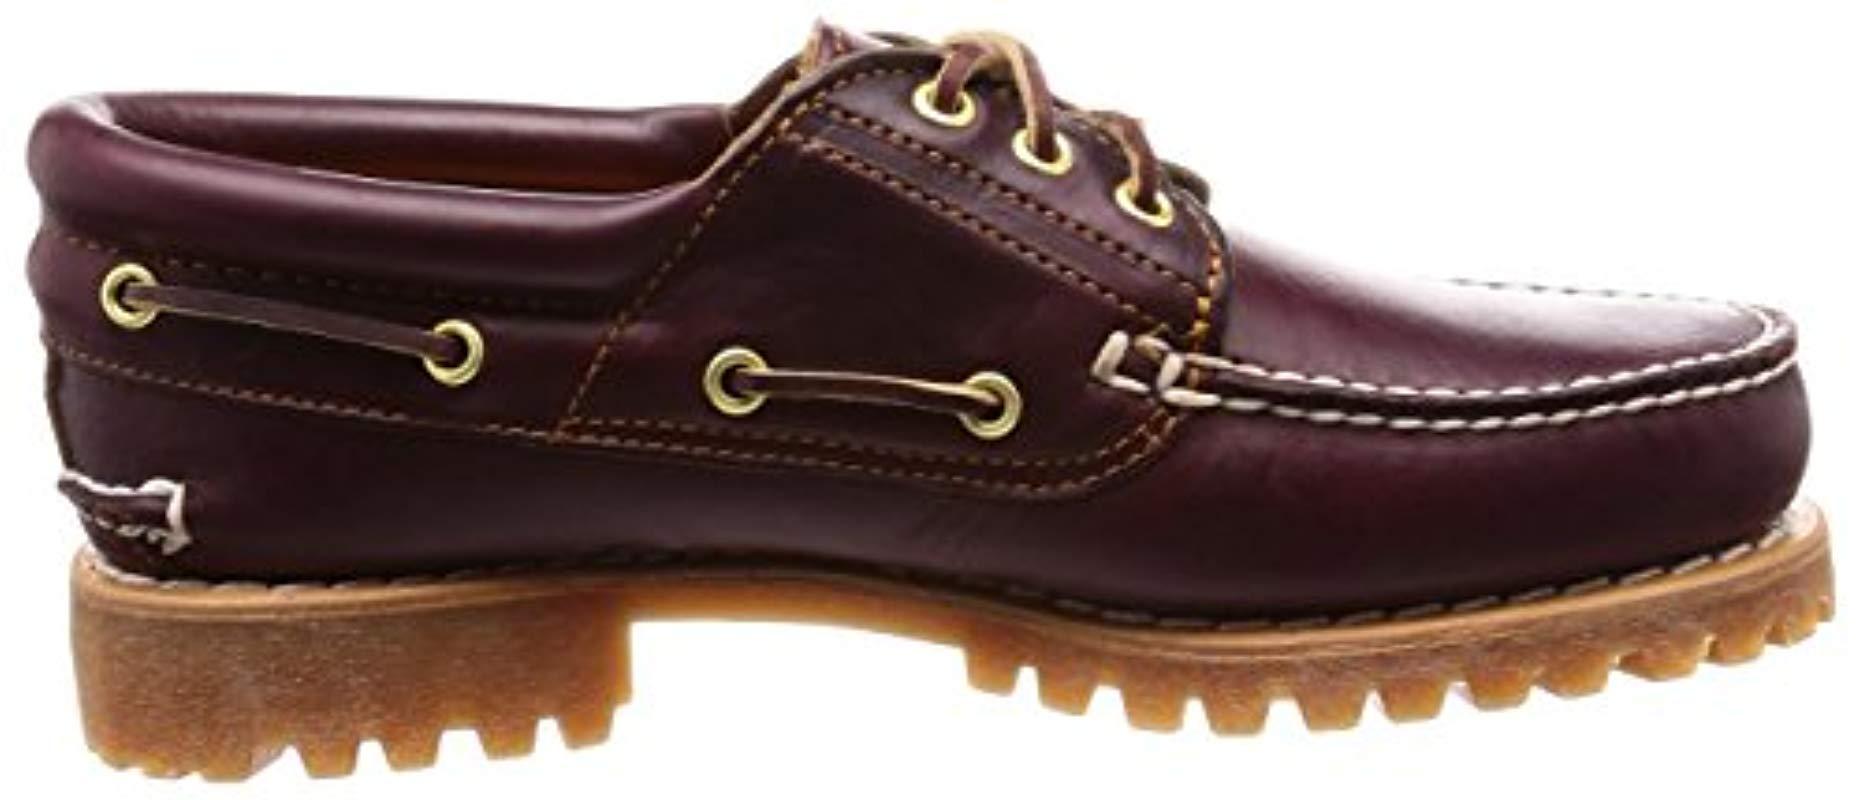 Timberland Leather Classic 3 Eye Lug Boat Shoe, Burgundy/brown,10.5 W Us  for Men | Lyst